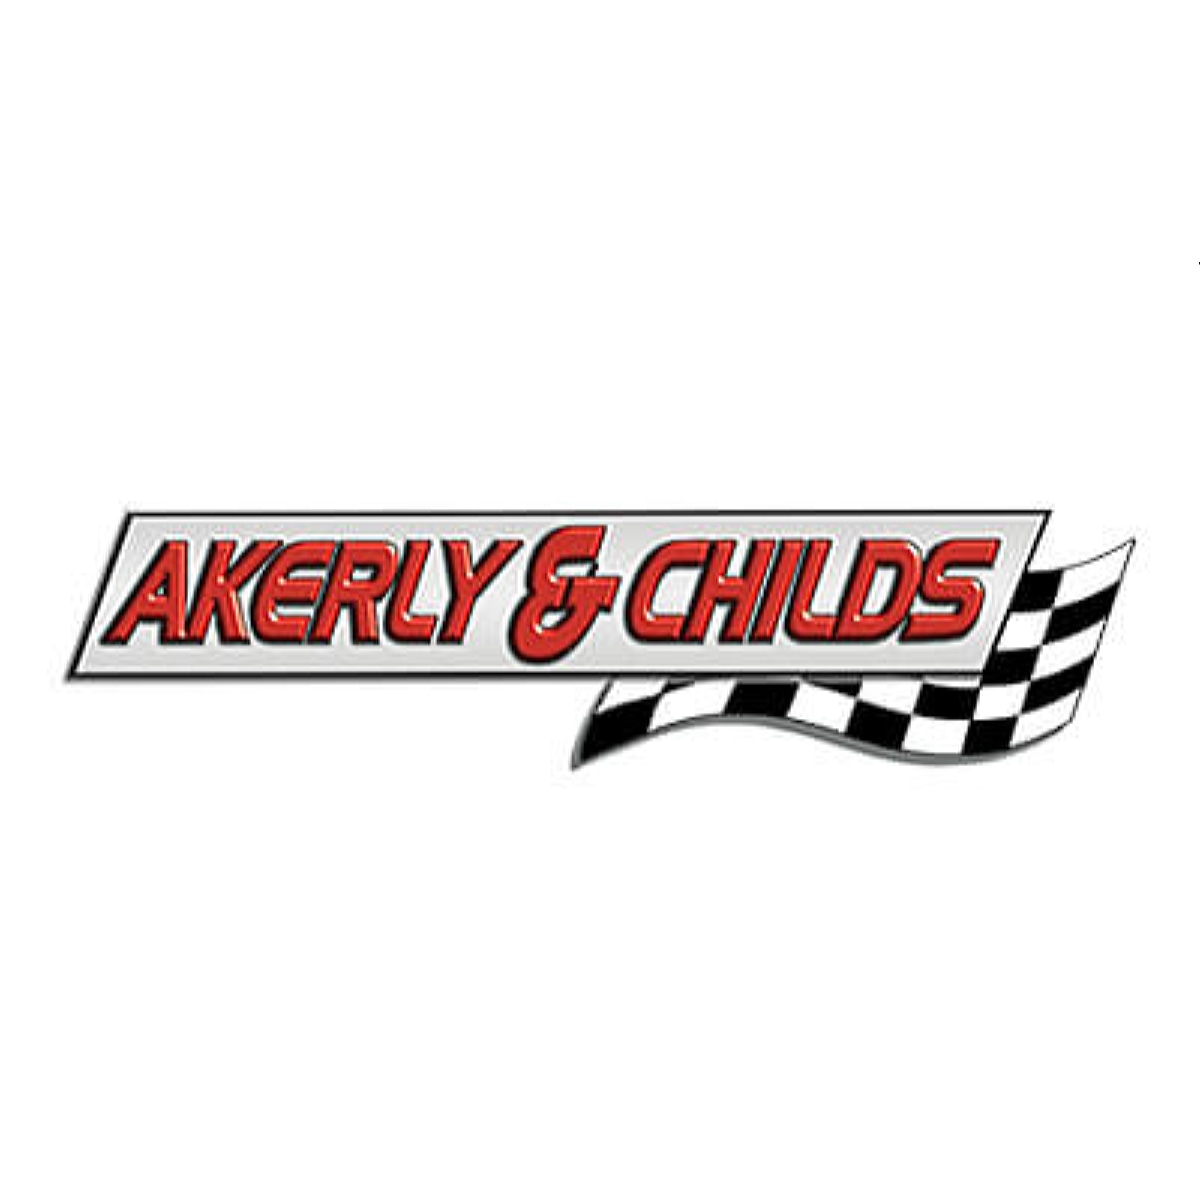 Akerly-Childs